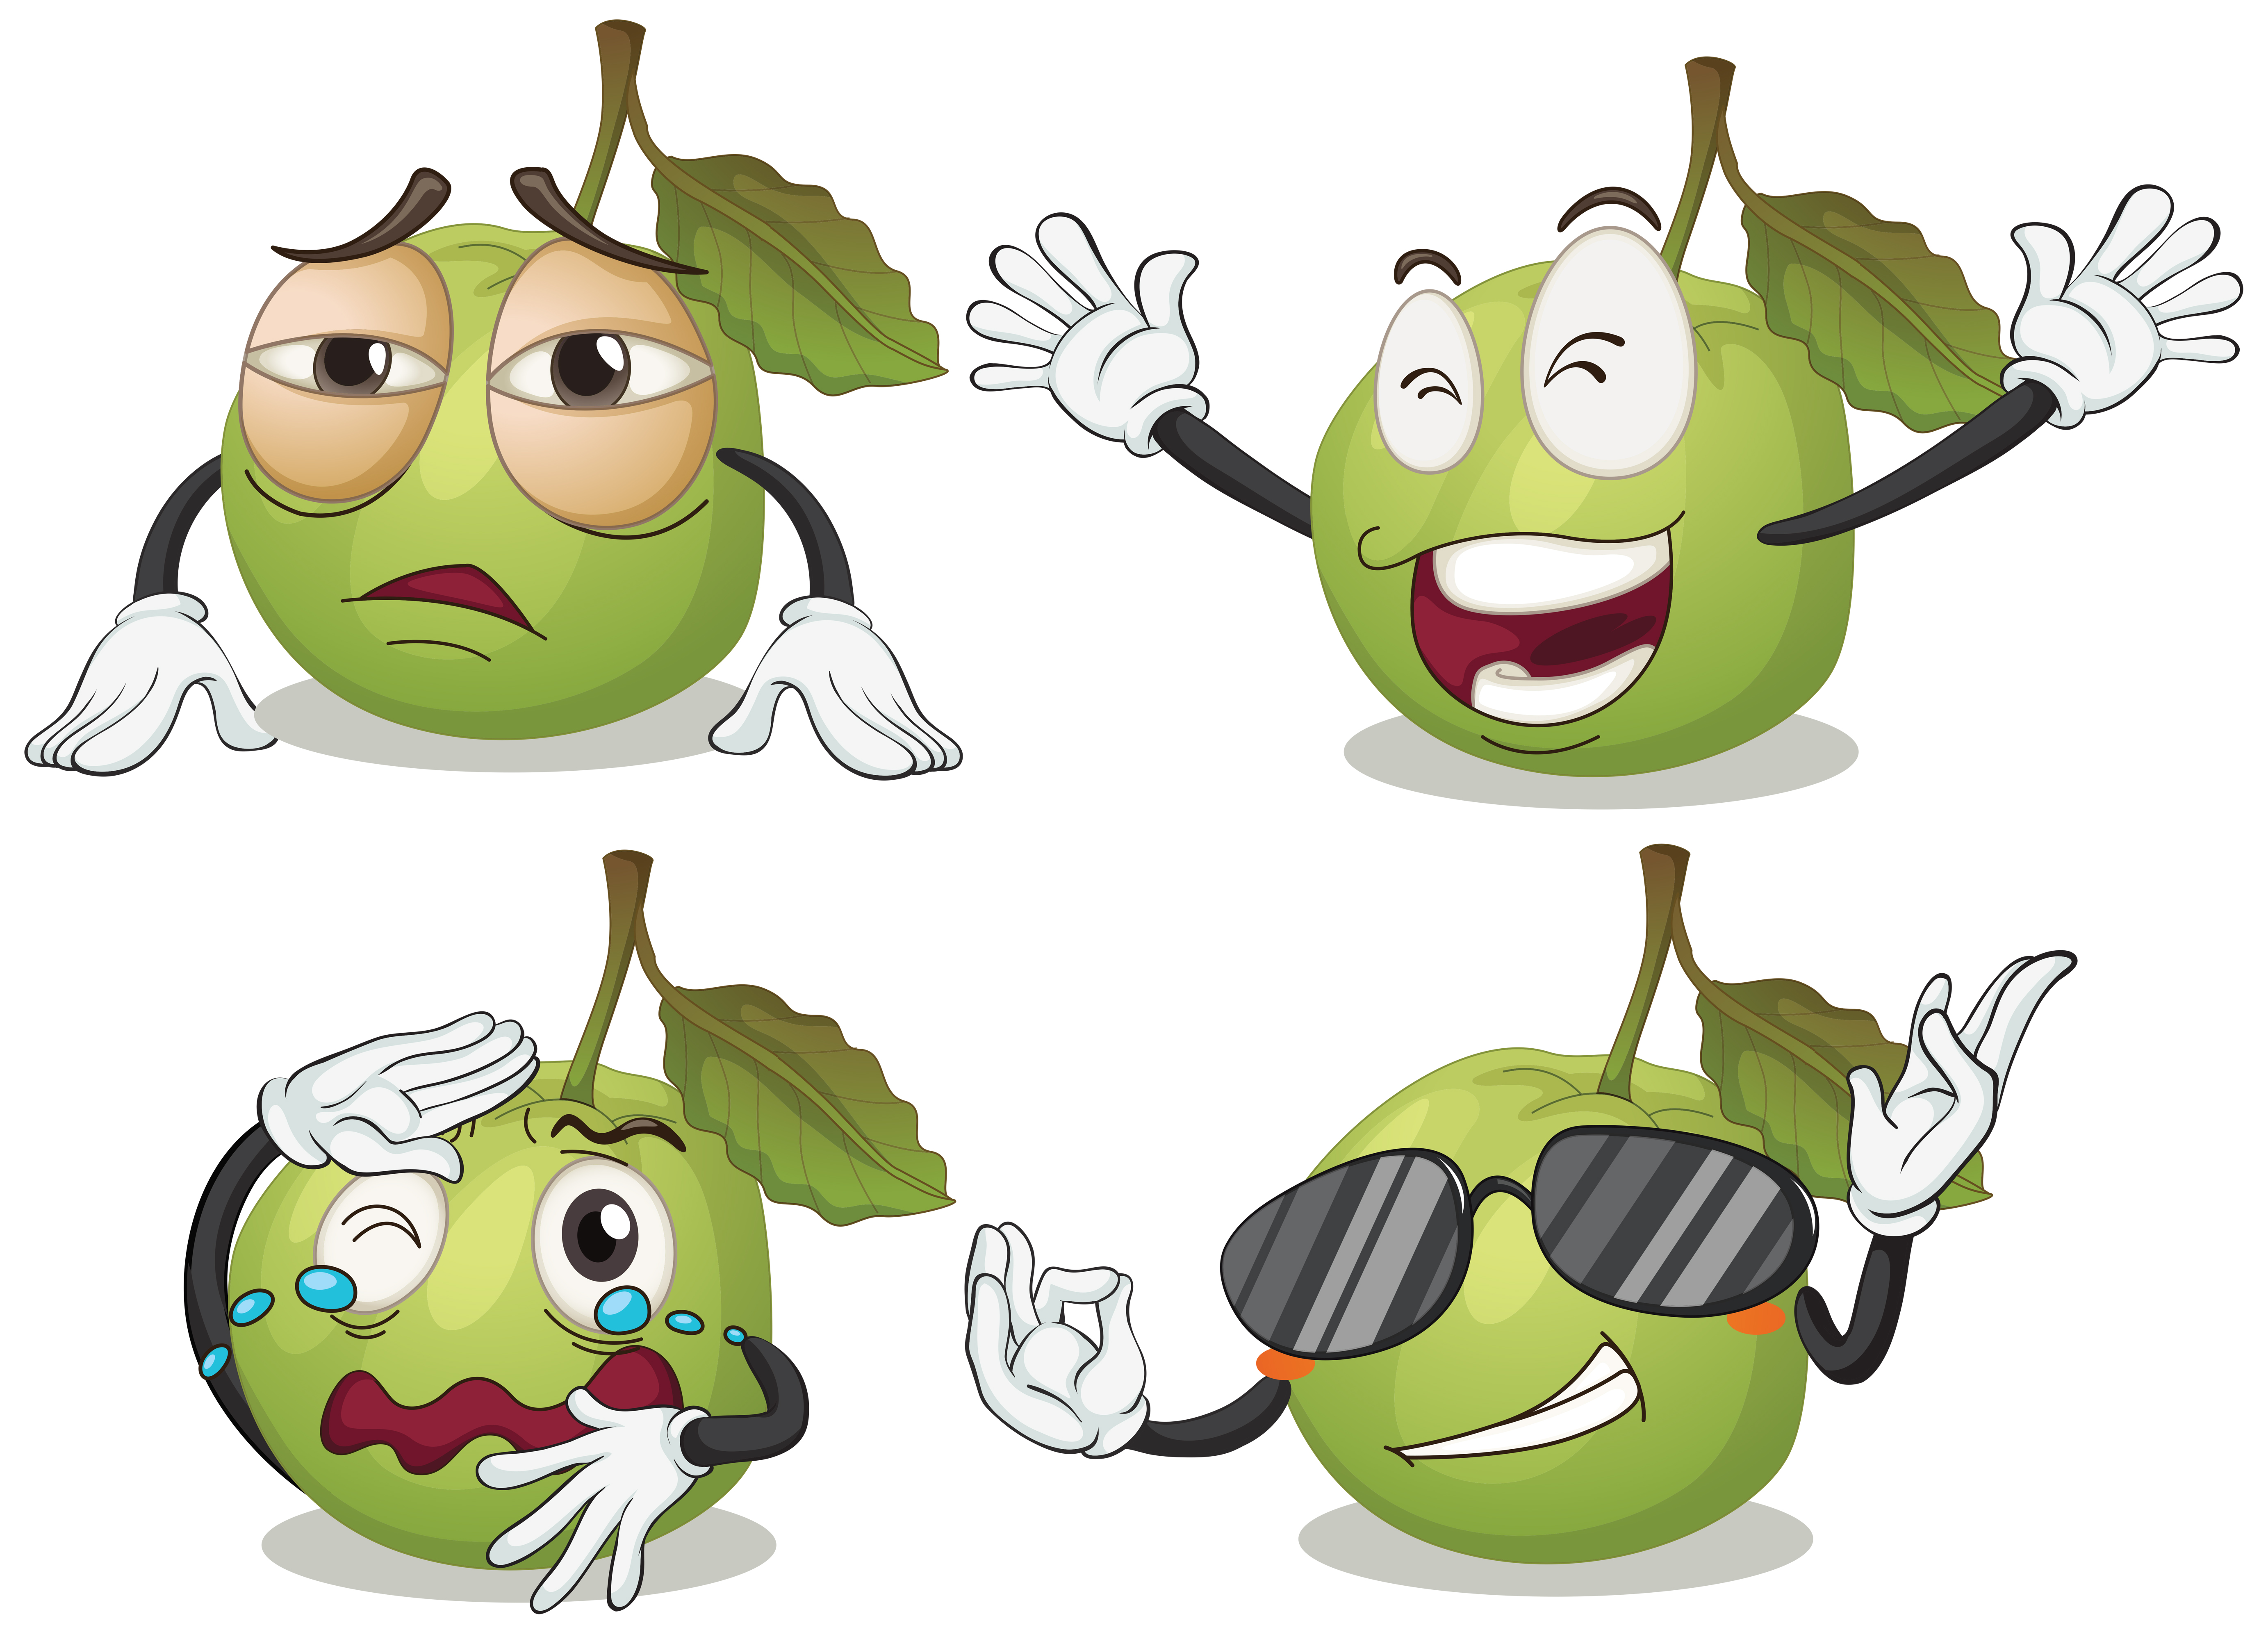 Illustration of guava with facial expressions.